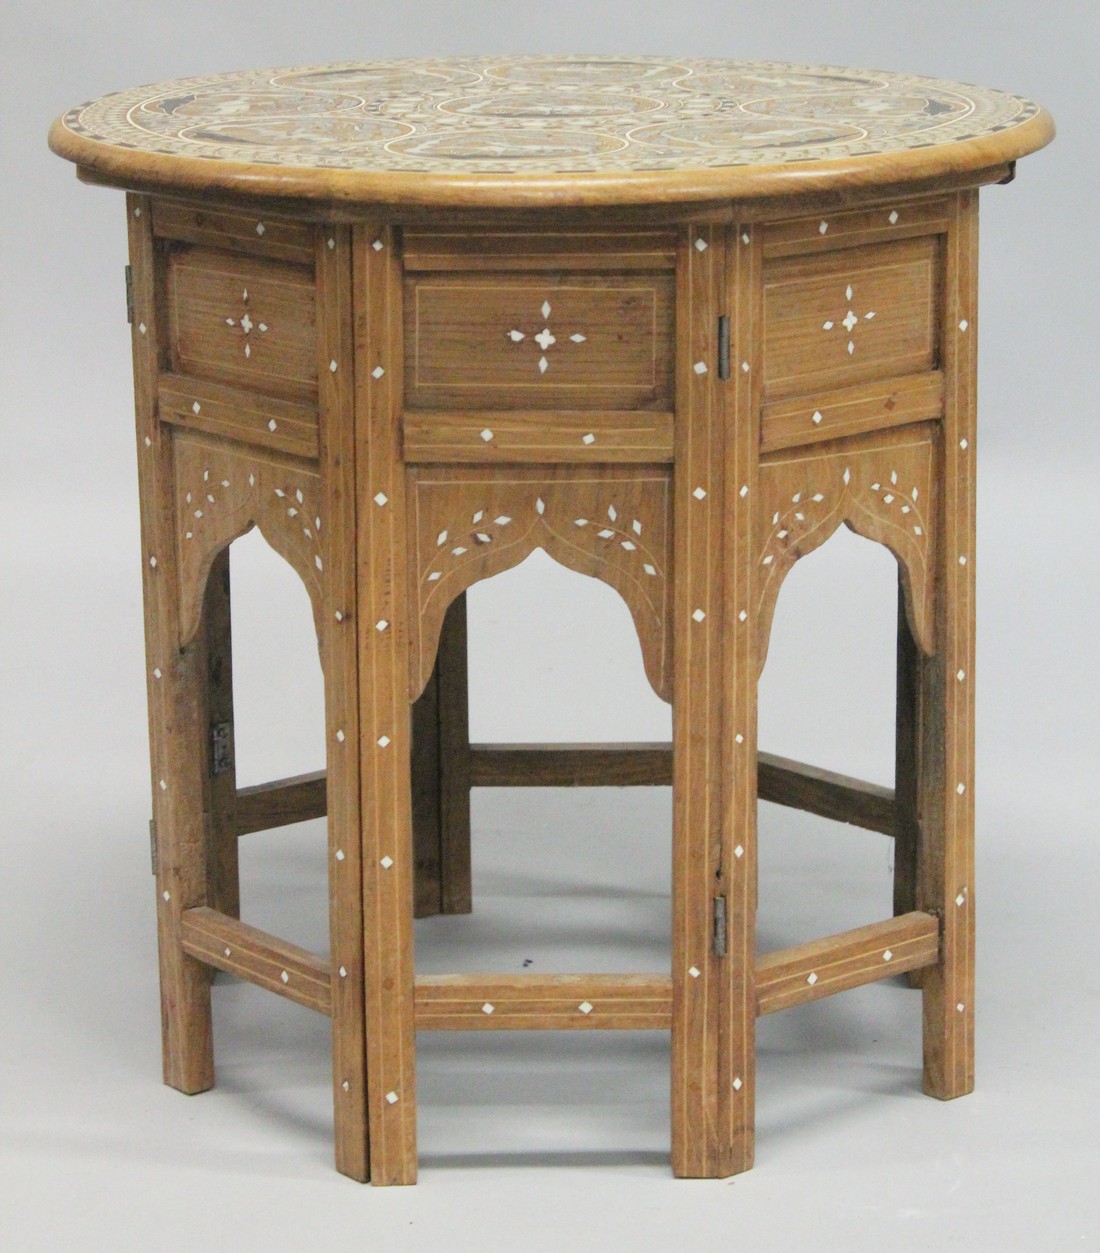 A GOOD AND UNUSUAL INDIAN BONE INLAID CIRCULAR HARDWOOD TABLE, with folding base, the top inlaid - Image 4 of 4